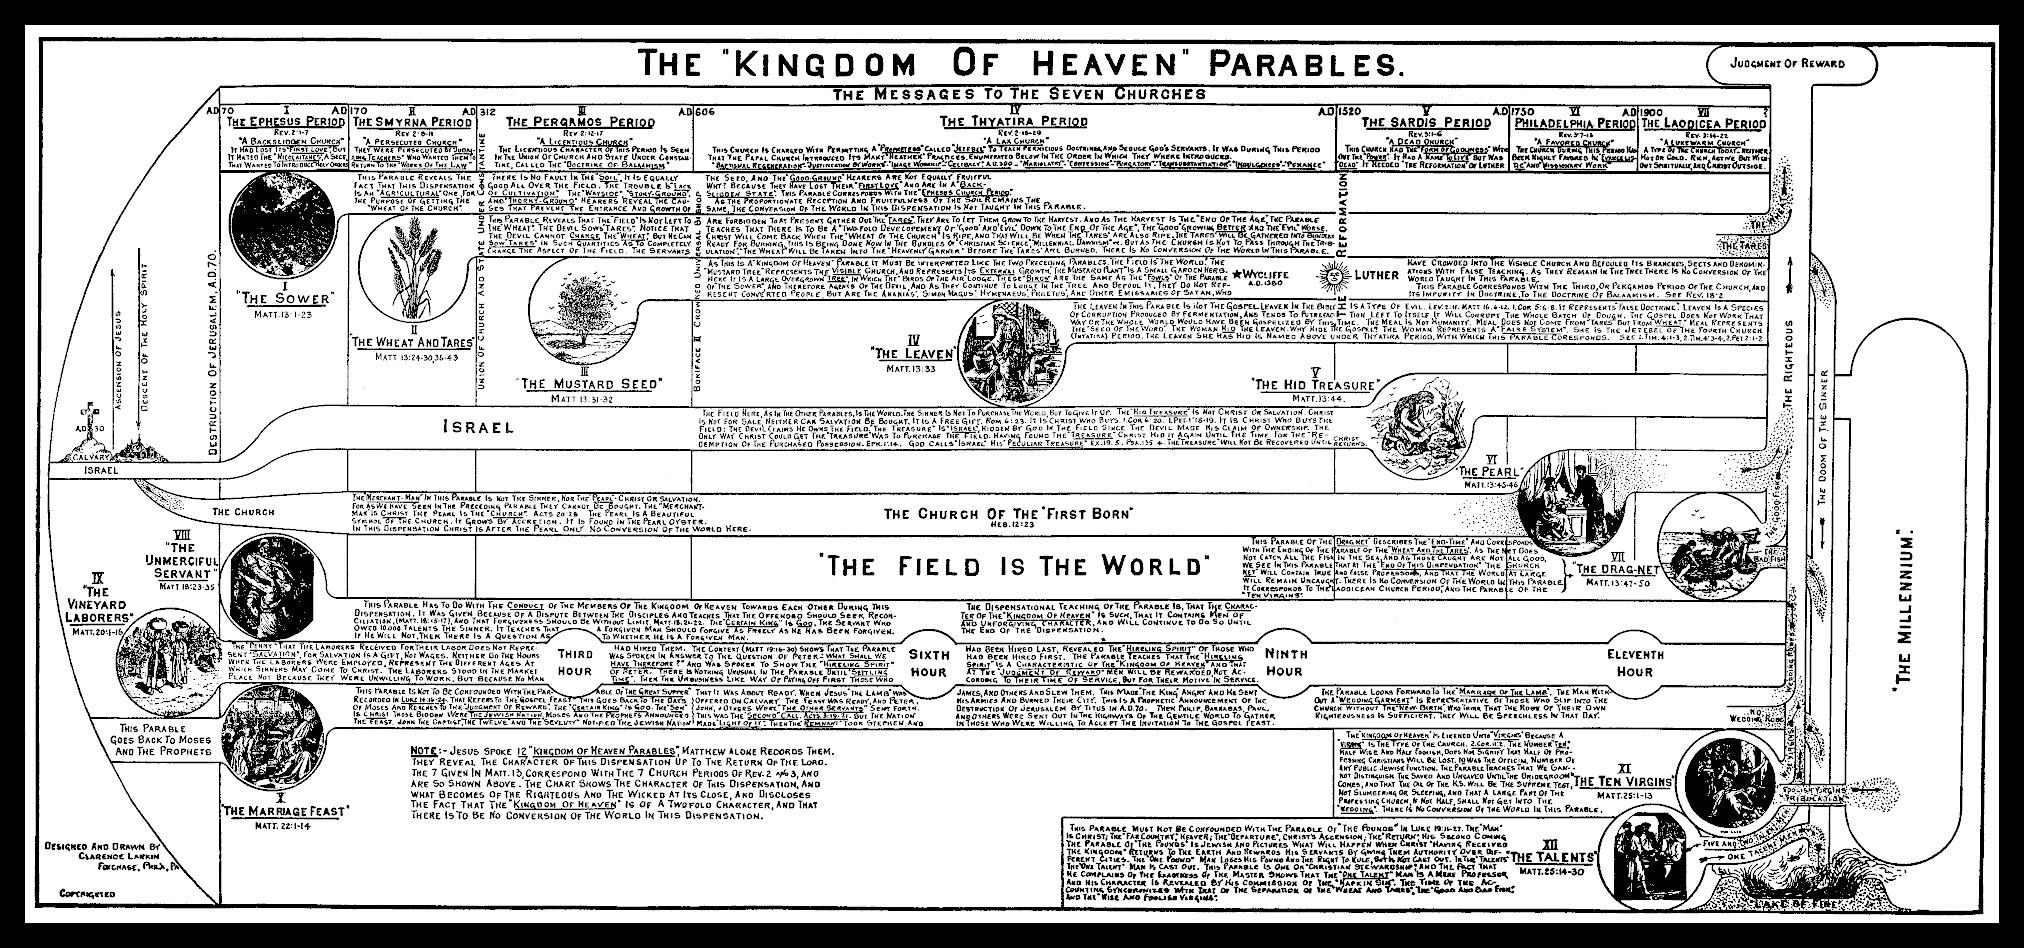 Parables of Jesus - Kingdom of Heaven Parables from Jesus